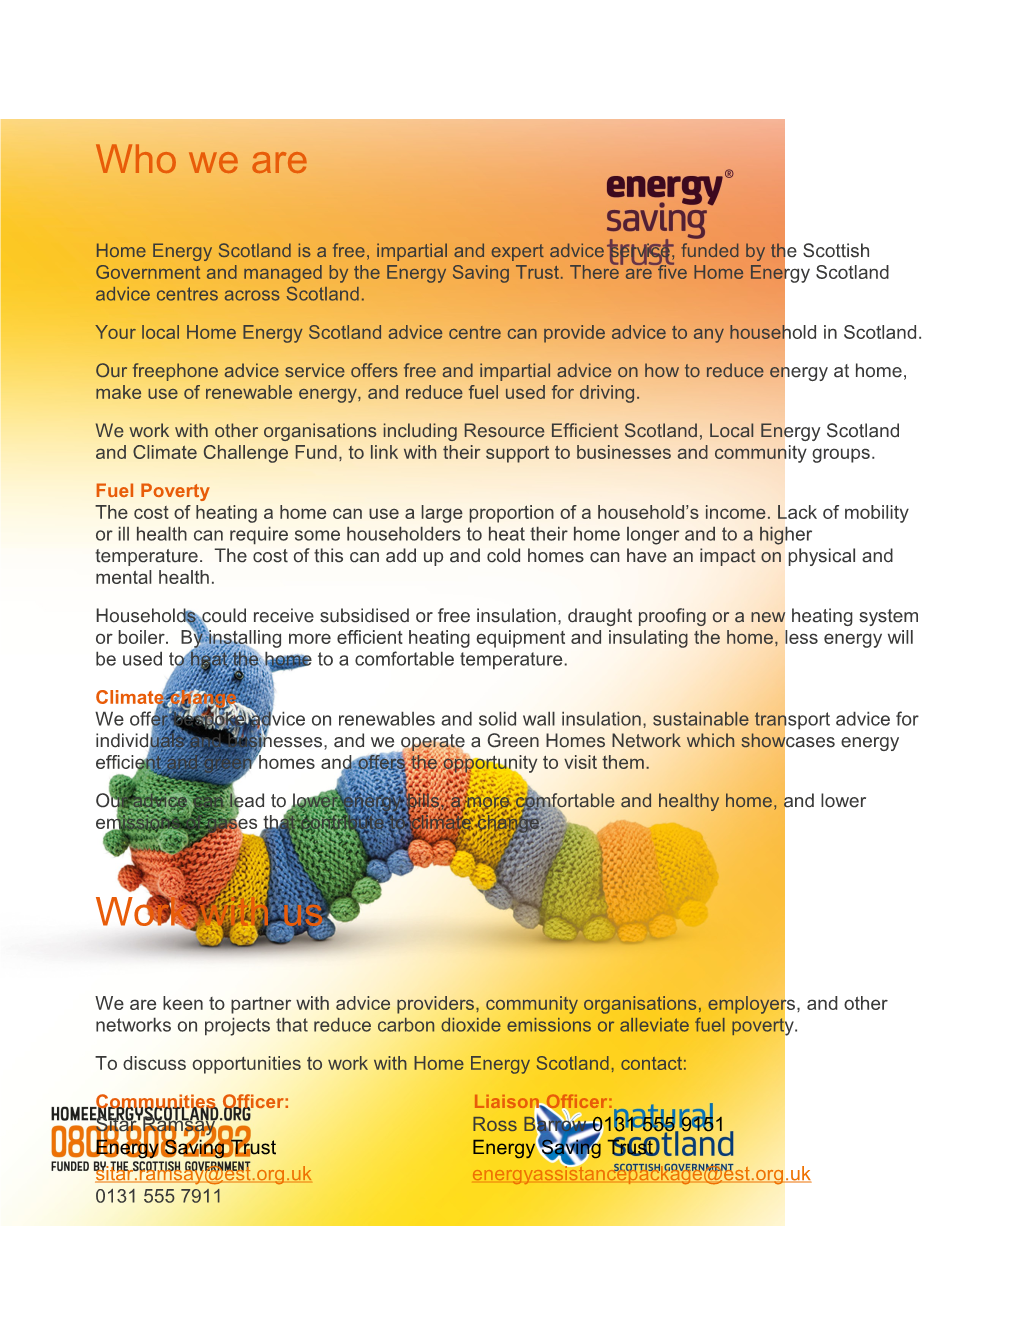 Your Local Home Energy Scotland Advice Centre Can Provide Advice to Any Household in Scotland